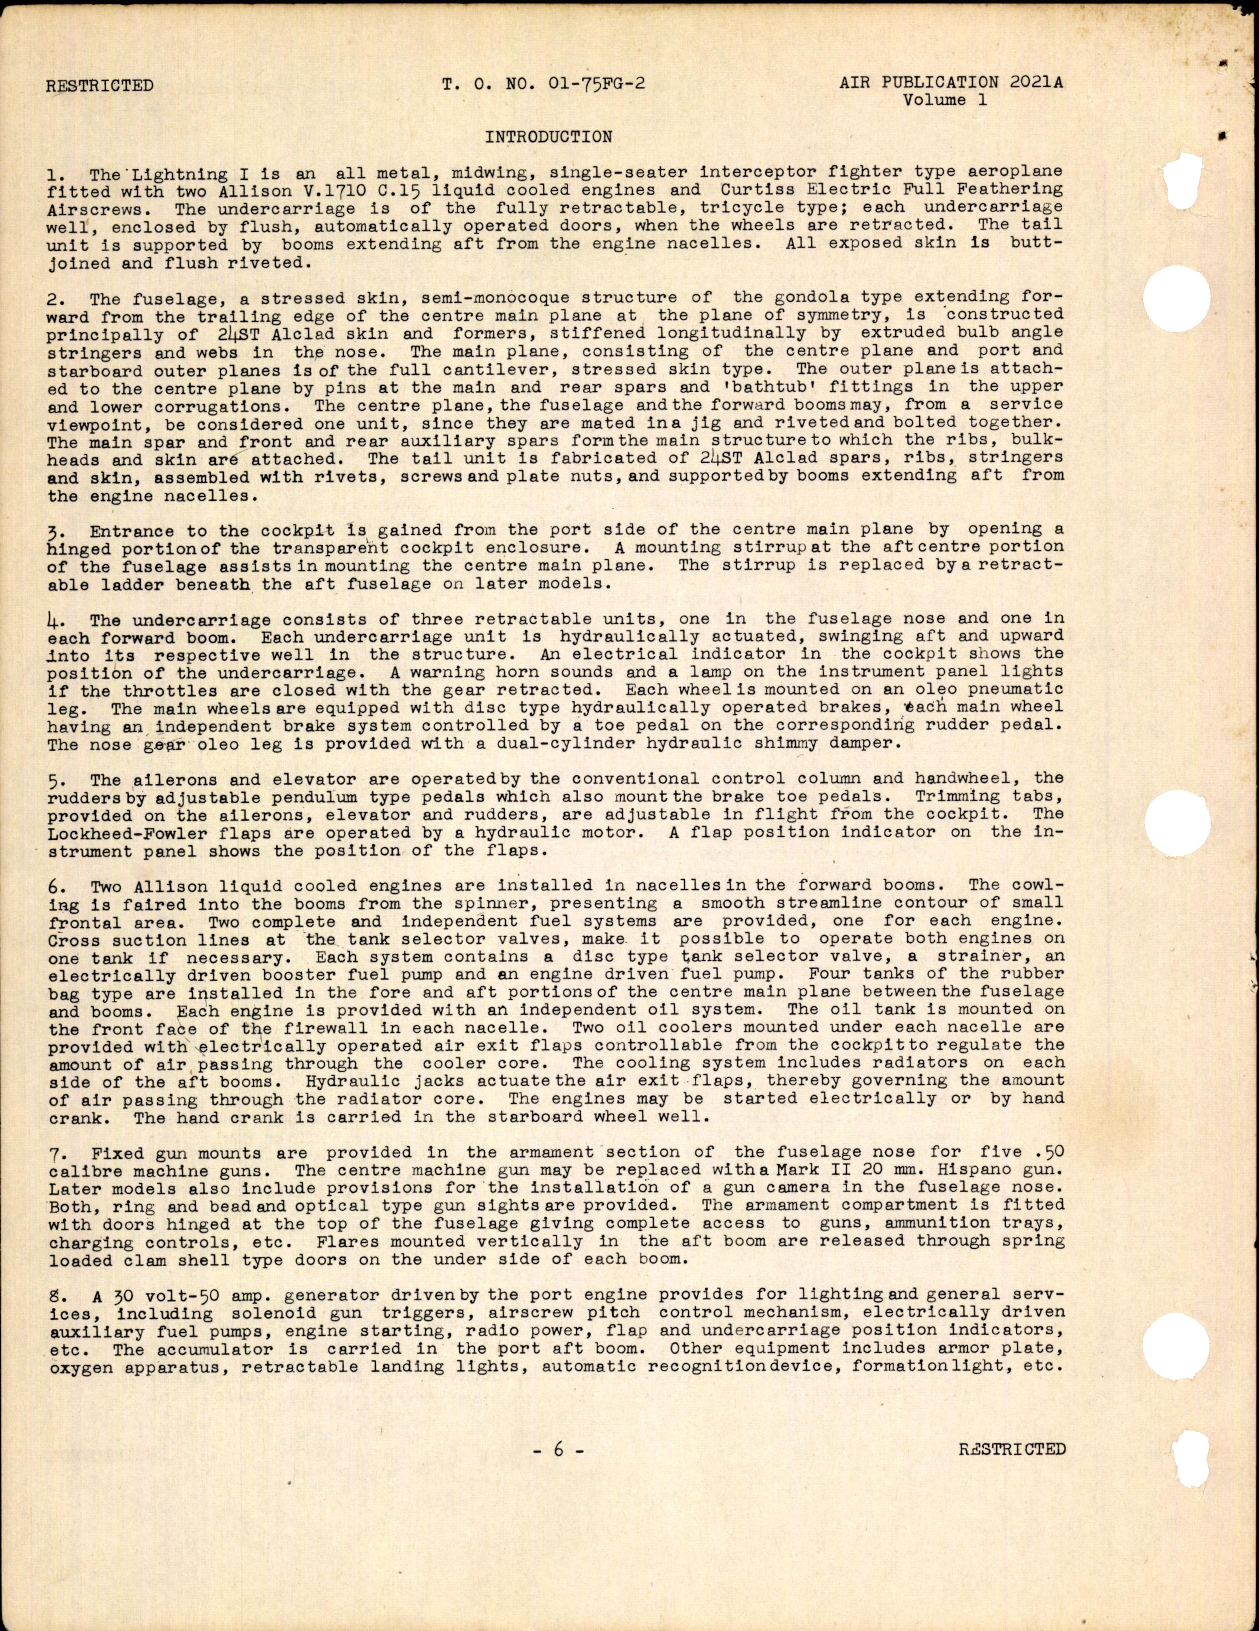 Sample page 6 from AirCorps Library document: Service Instructions for the Lightning 1 Aeroplane (Similar to AAF P-38)